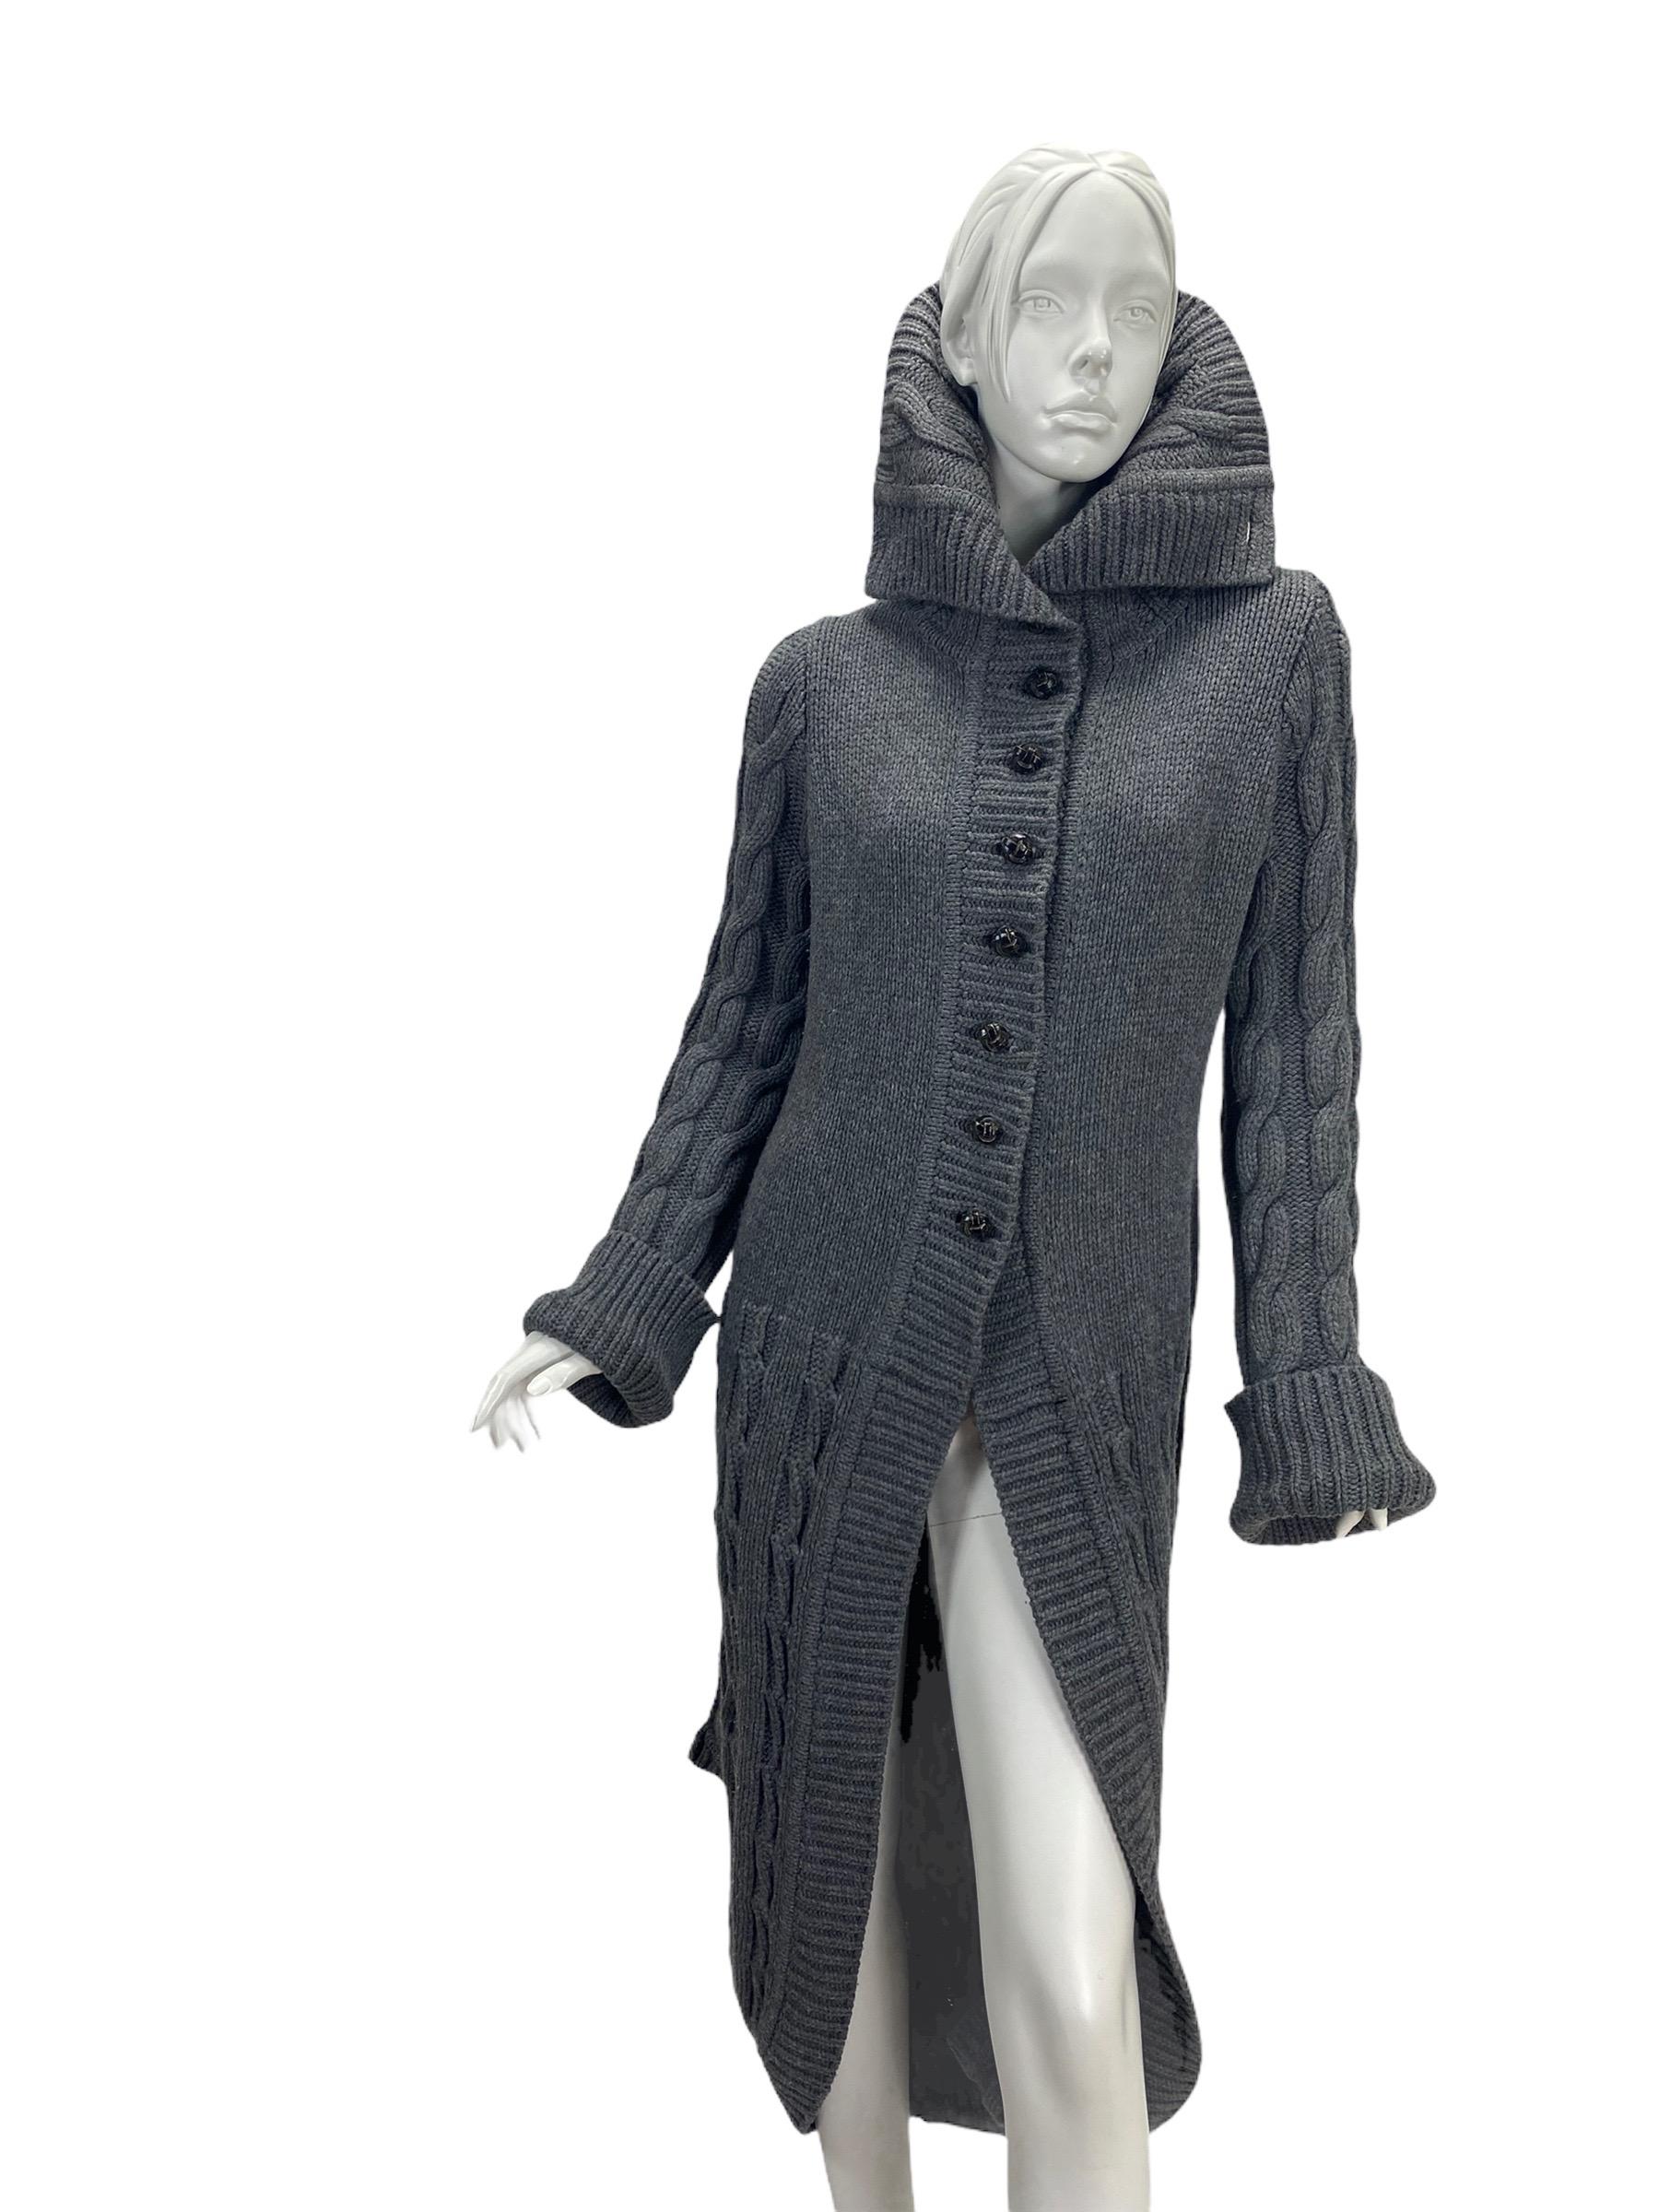 Black A/W 2006 ALEXANDER McQUEEN The Widows of Culloden Knit Convertible Cardigan Coat For Sale